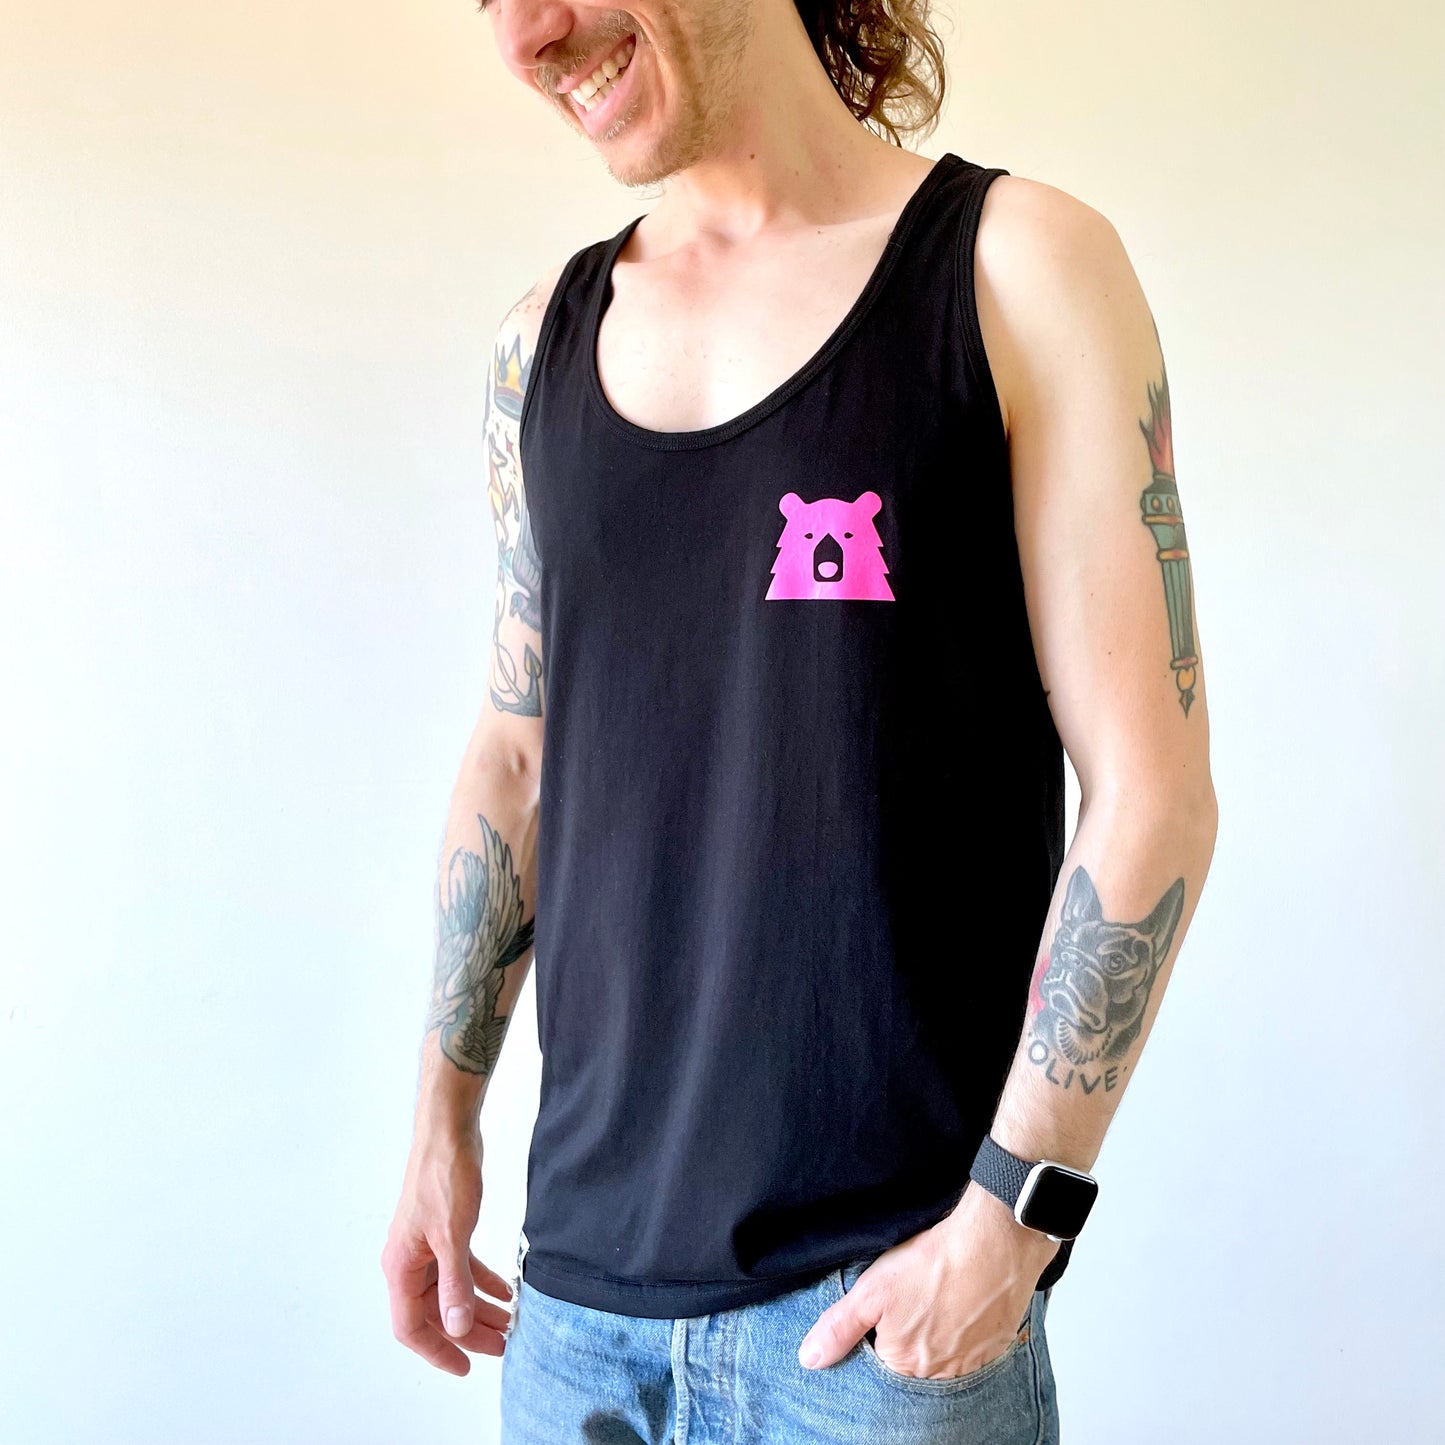 Mascot Tank - Black with Hot Pink